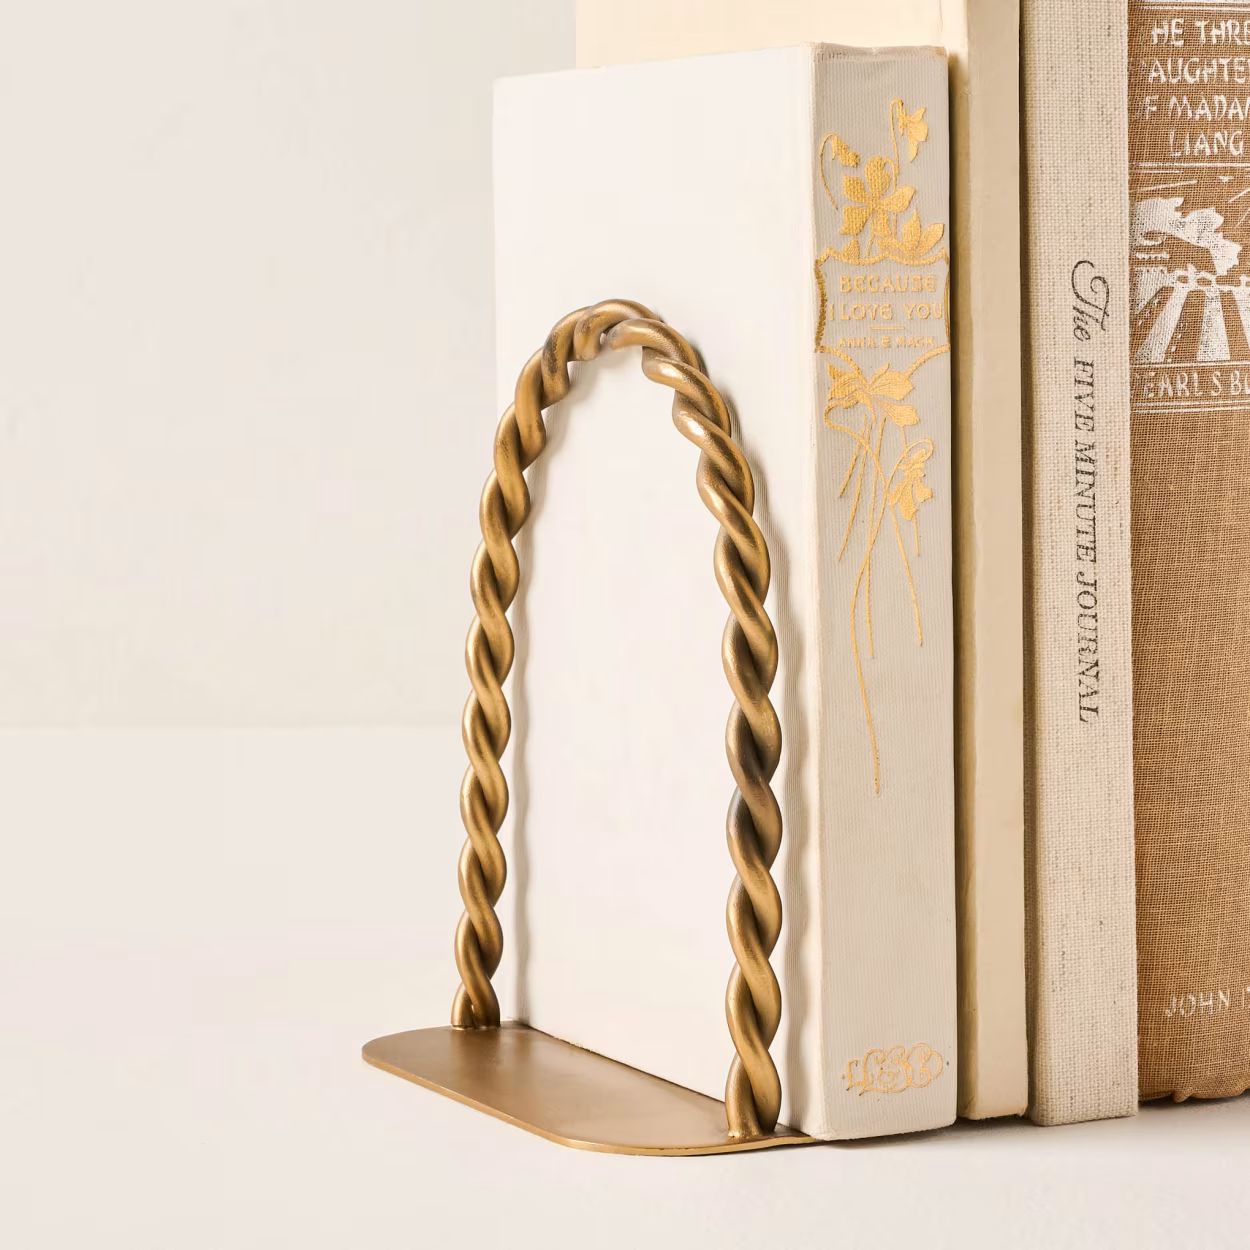 Twisted Vintage Inspired Bookends | Magnolia